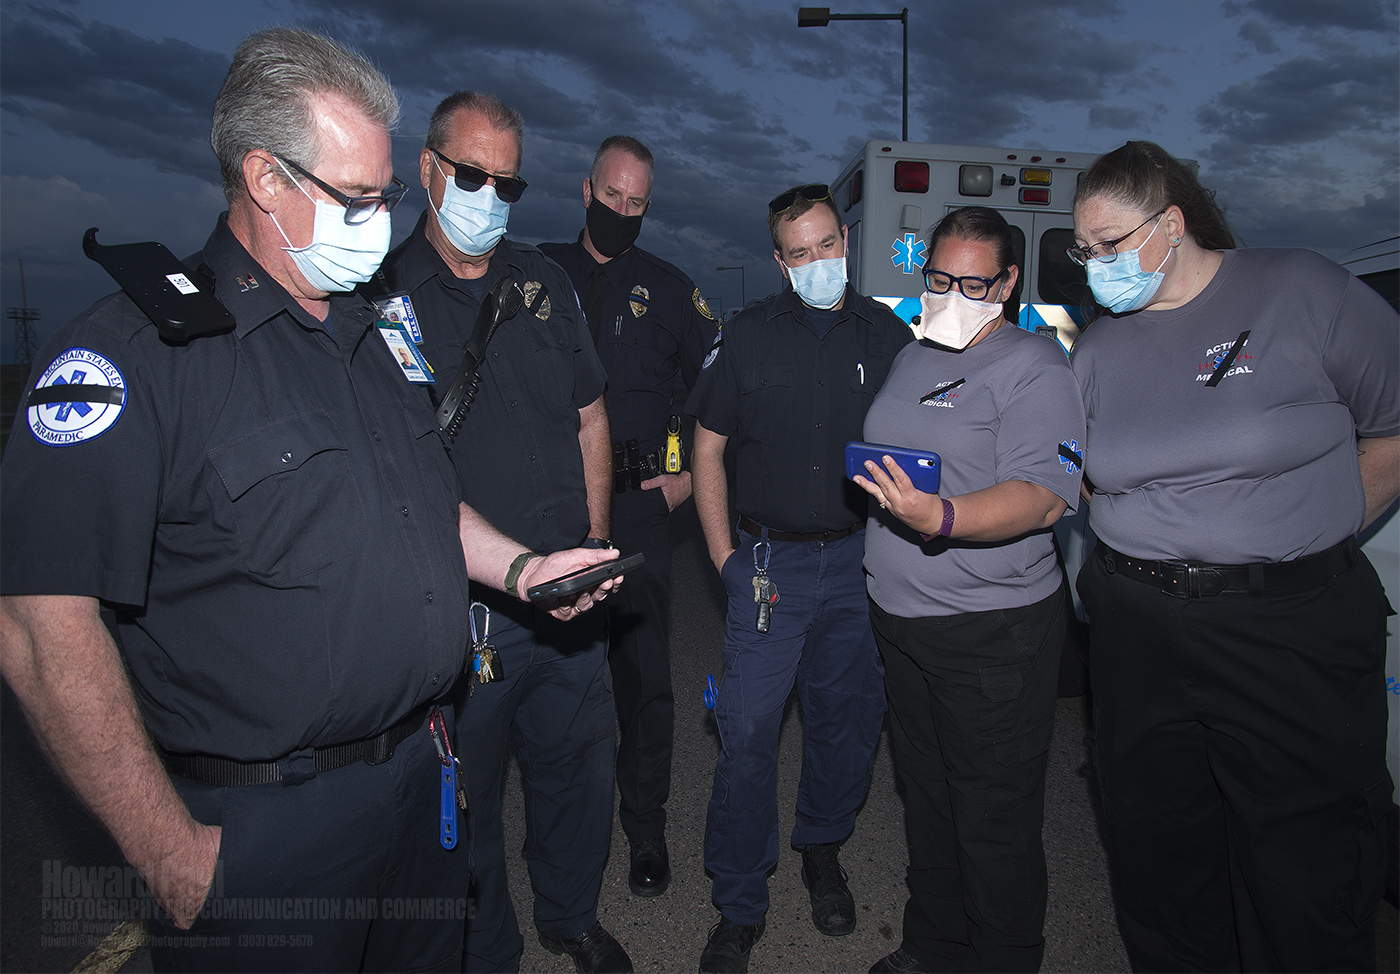 (L-R) Paramedic David Fending, Mountain States EMS, University of Colorado Police Department officers and Action Medical employees watch the 9News live aerial coverage of the coffin being removed from the United Airlines jet that transported Paul Cary’s remains.